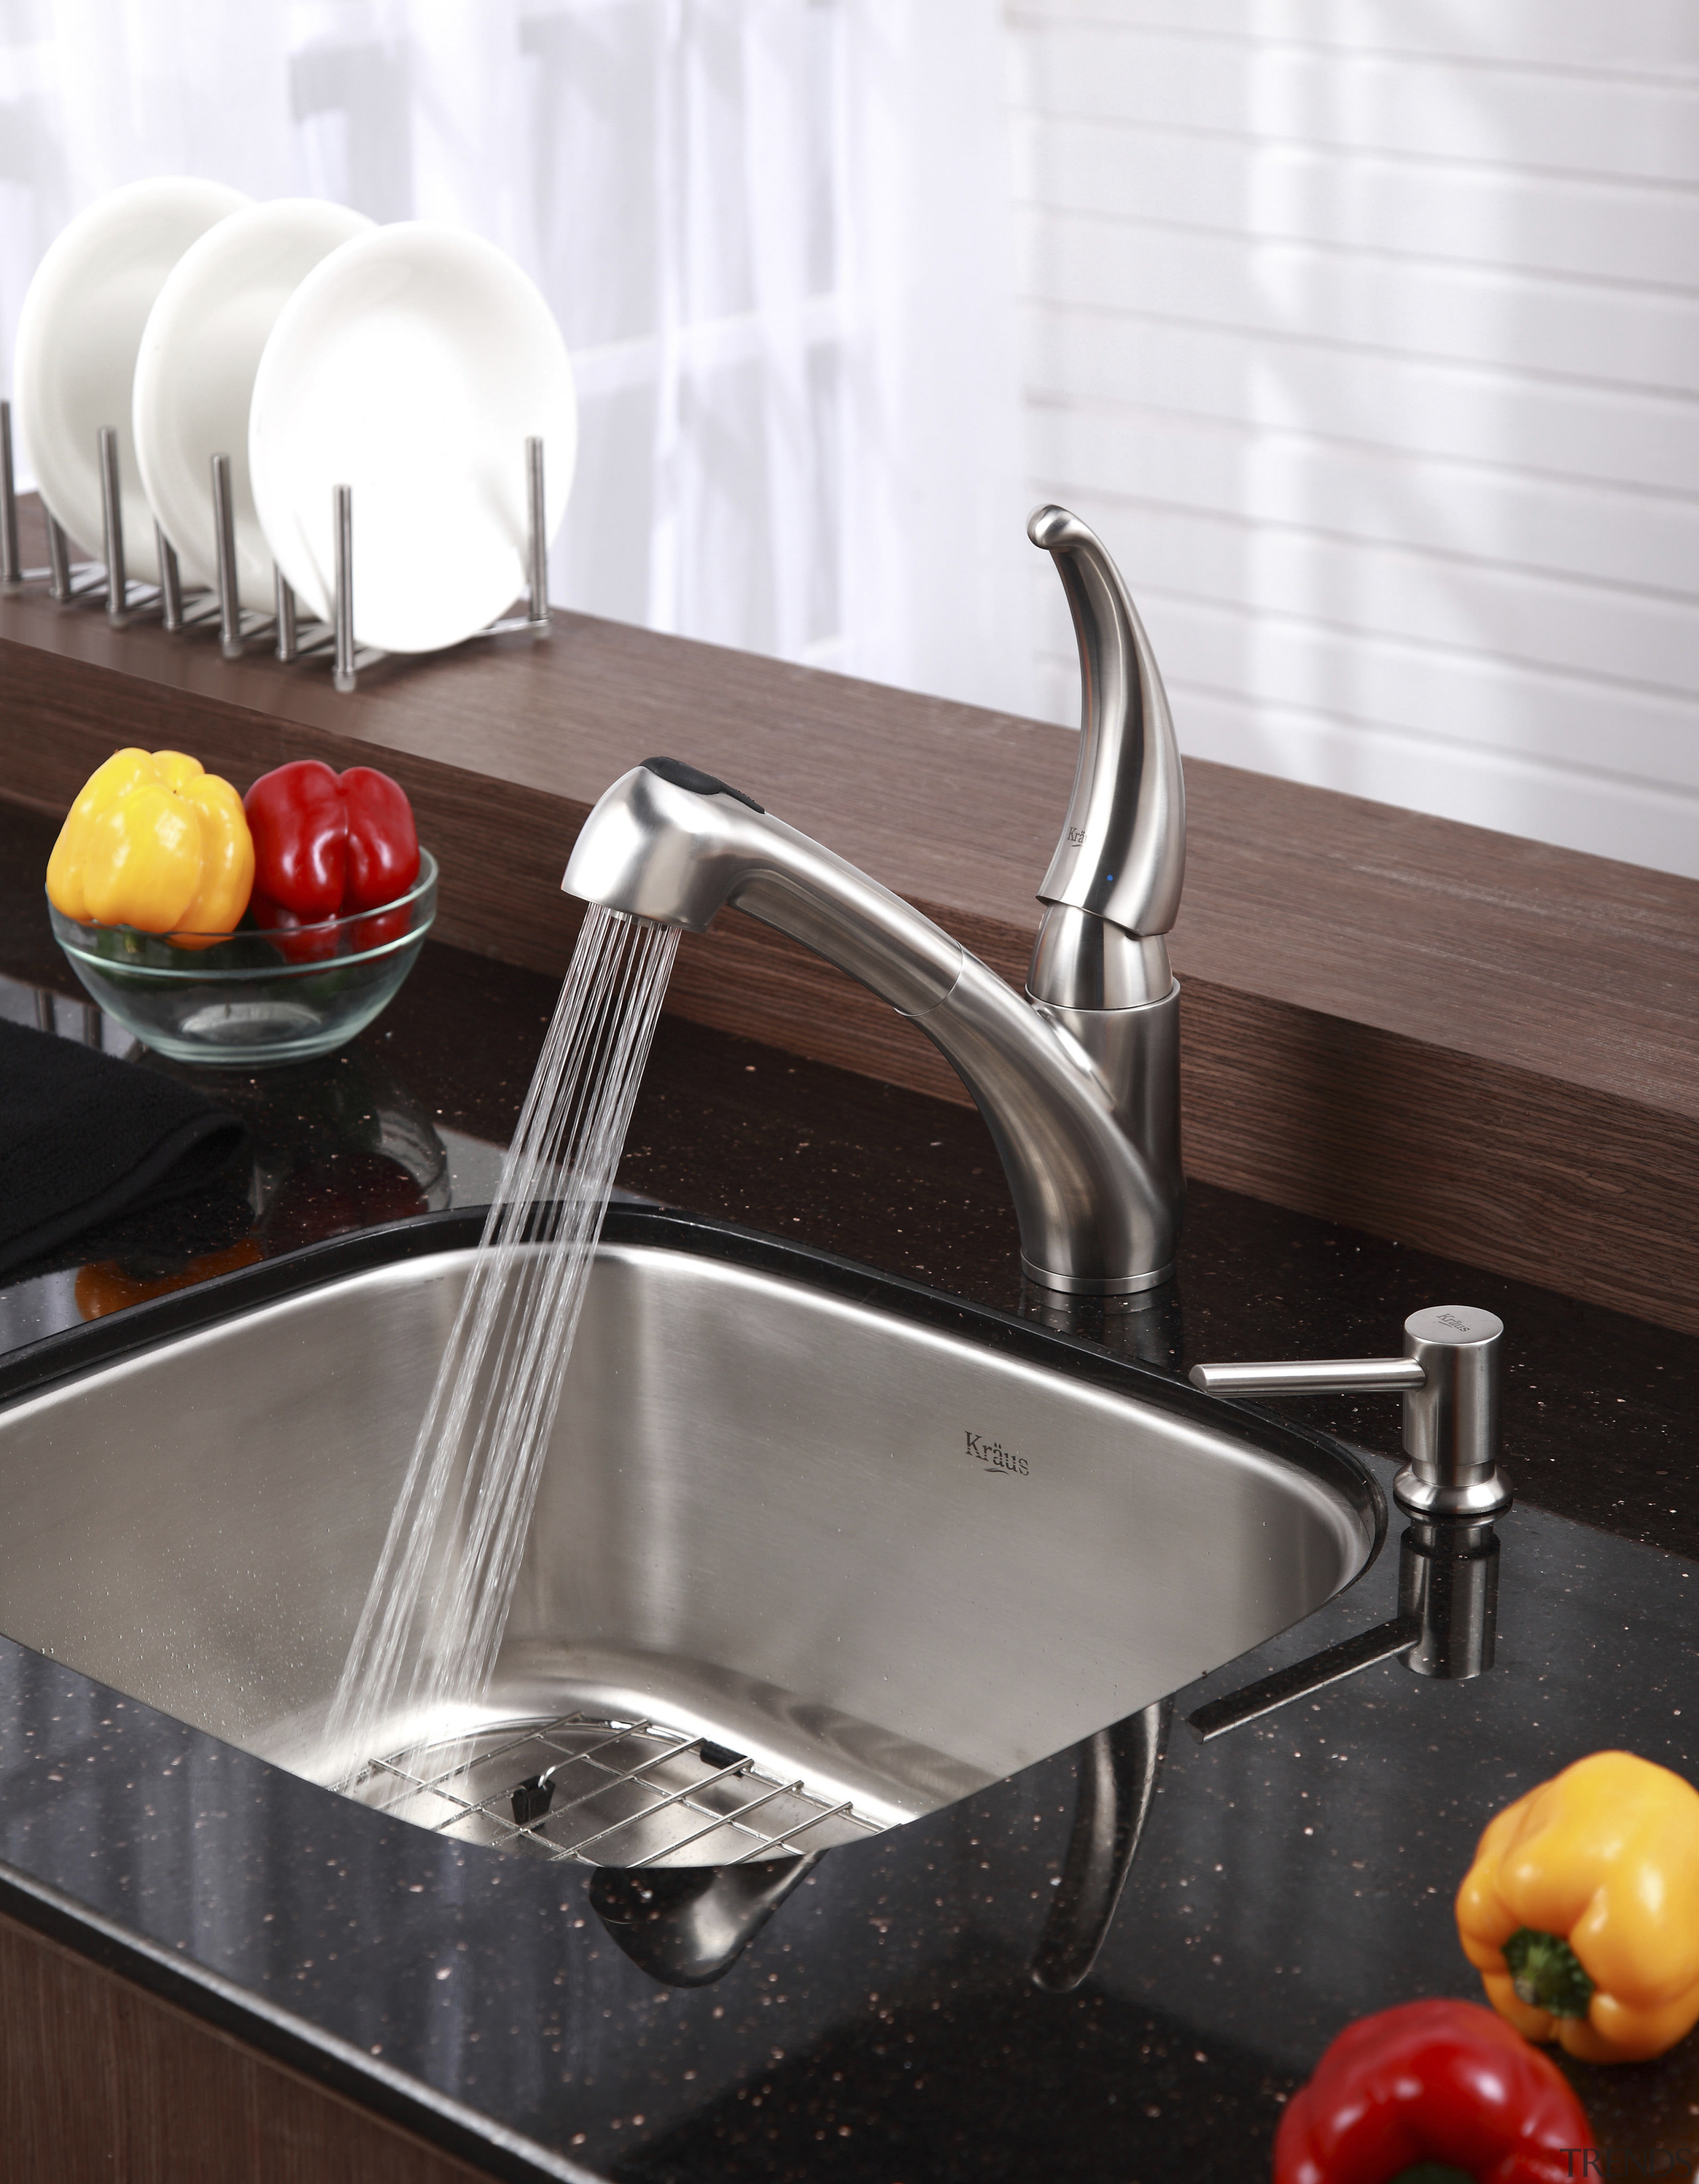 kitchen tap stainless steel modern style - kitchen cookware and bakeware, countertop, plumbing fixture, sink, tap, white, black